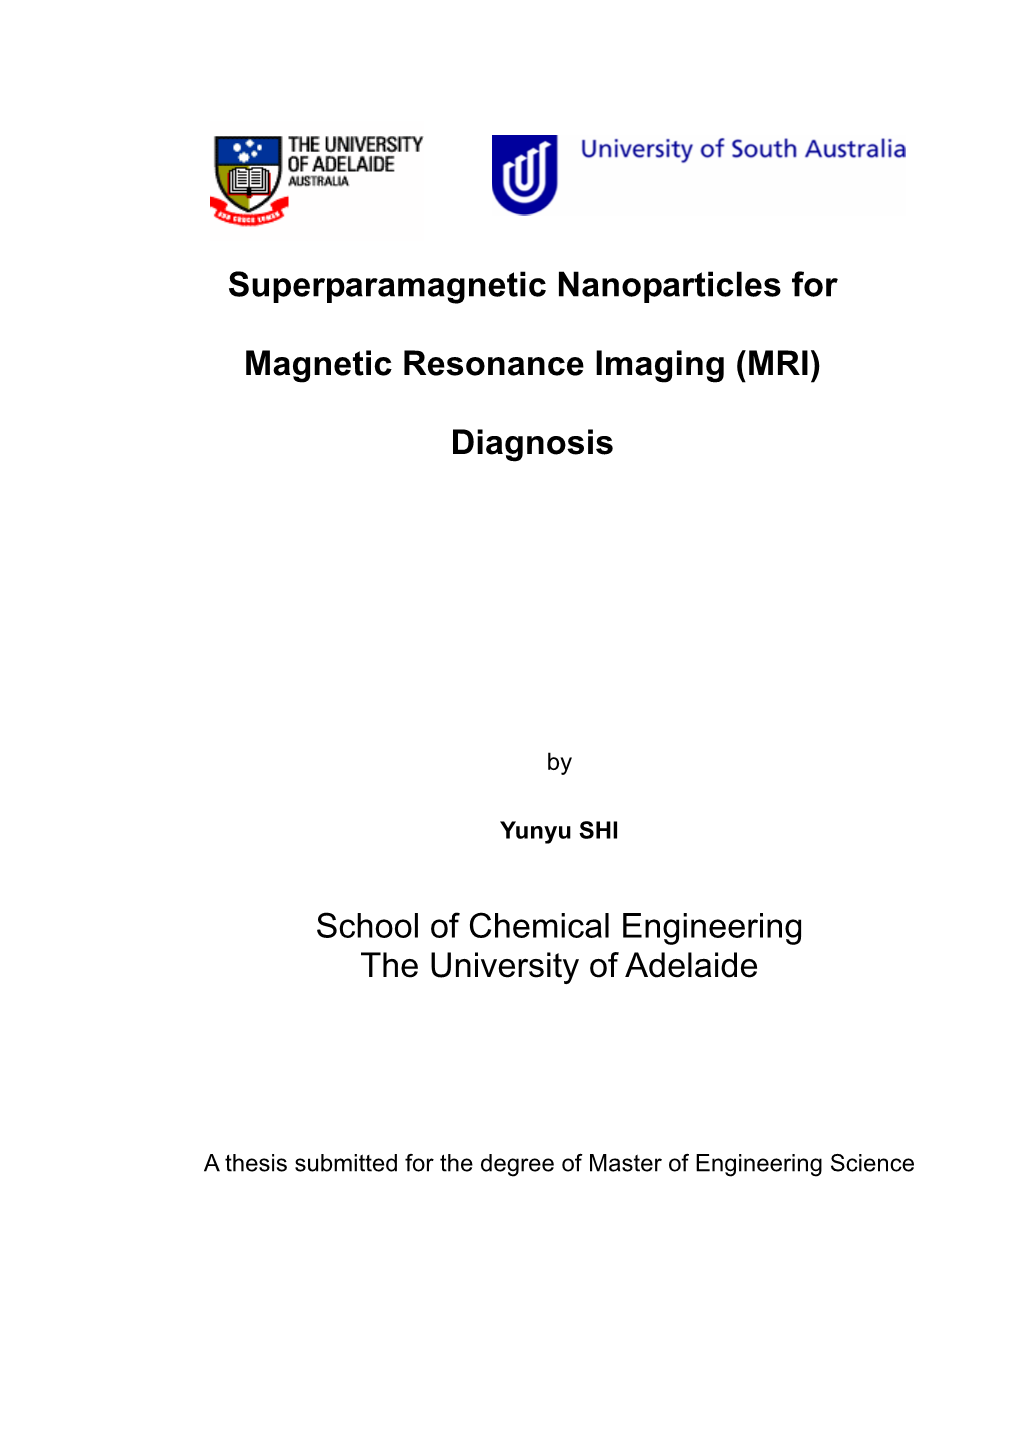 Superparamagnetic Nanoparticles for Magnetic Resonance Imaging (MRI